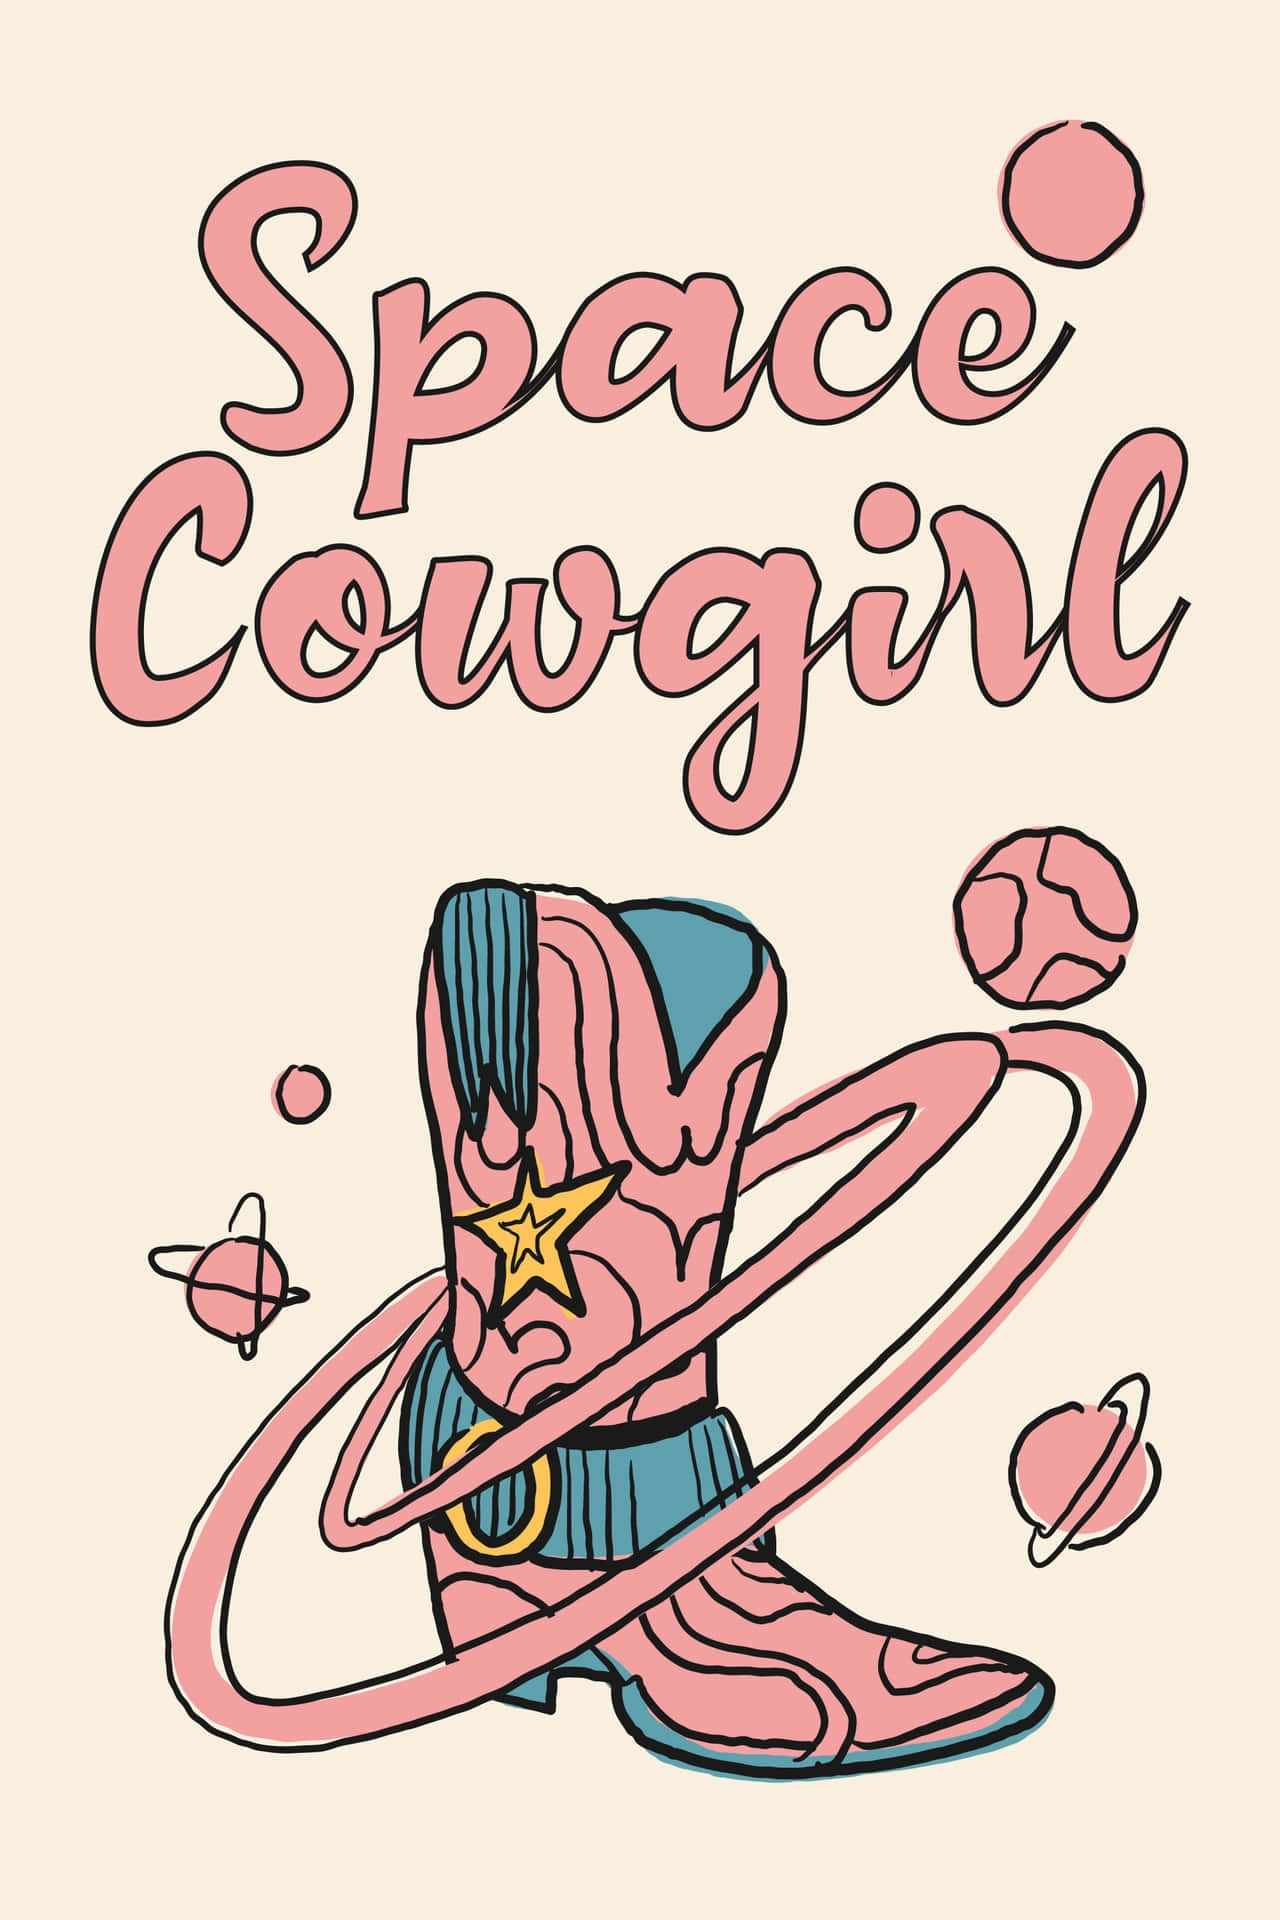 Space Cowgirl Boot Art Wallpaper